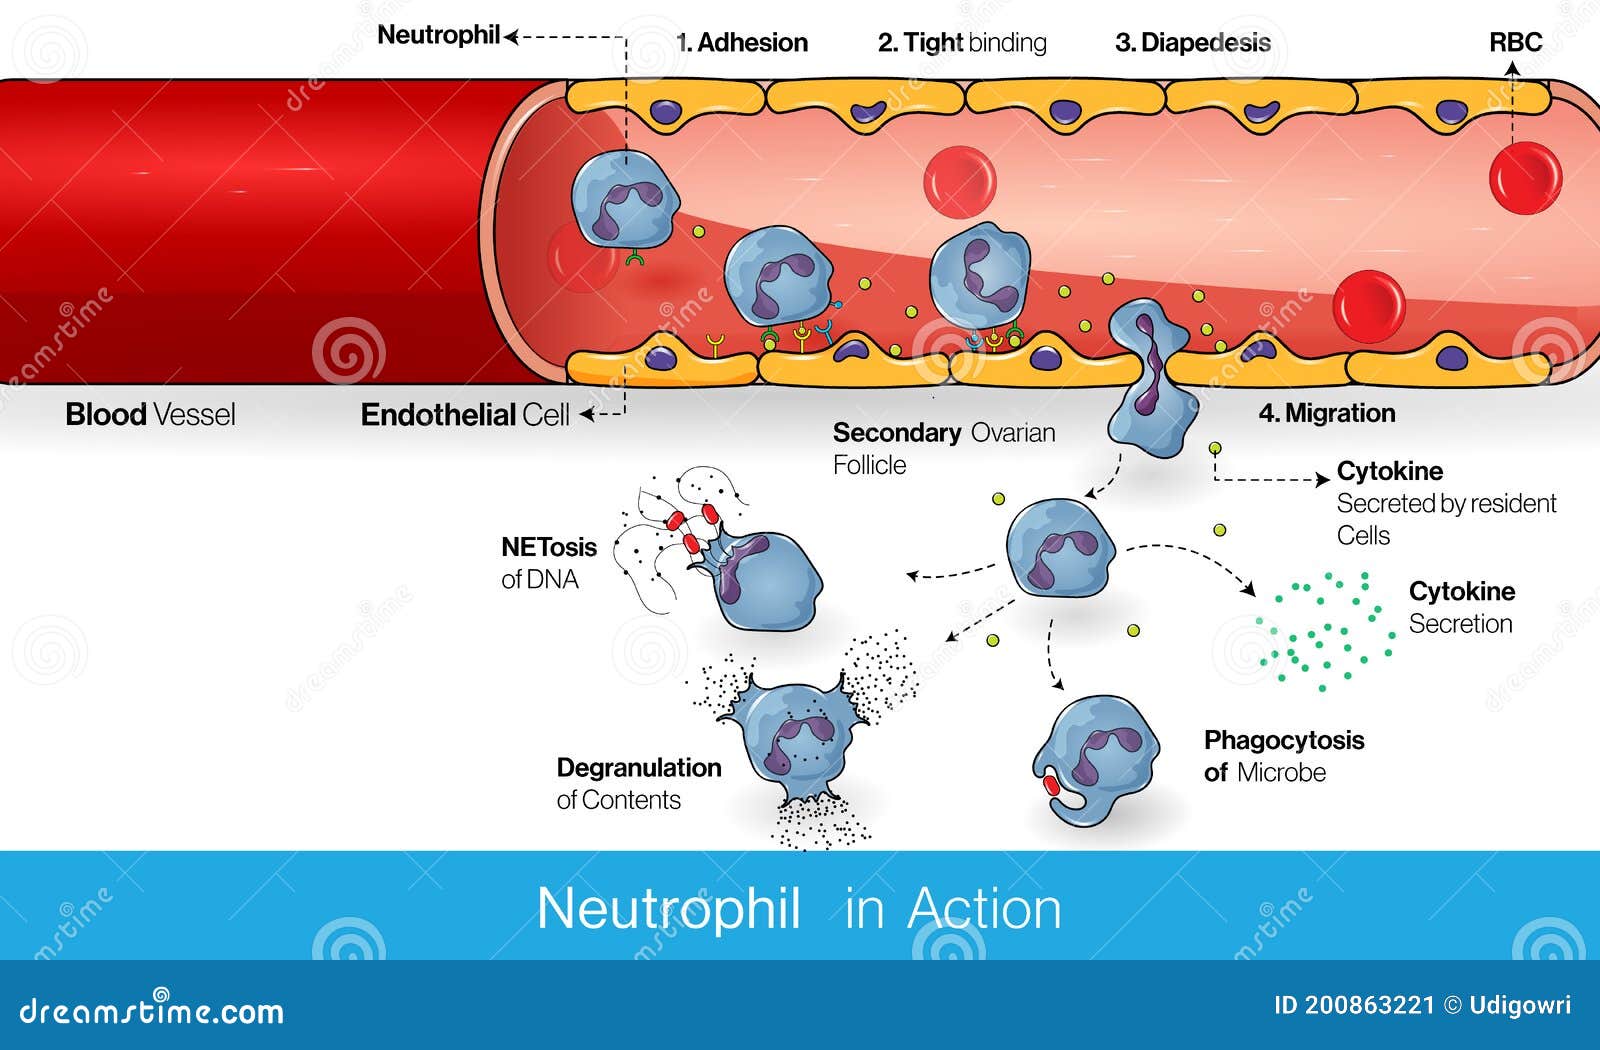 neutrophil circulation in blood vessel during infection process and diapedesis and infiltration into the tissue to kill microbe